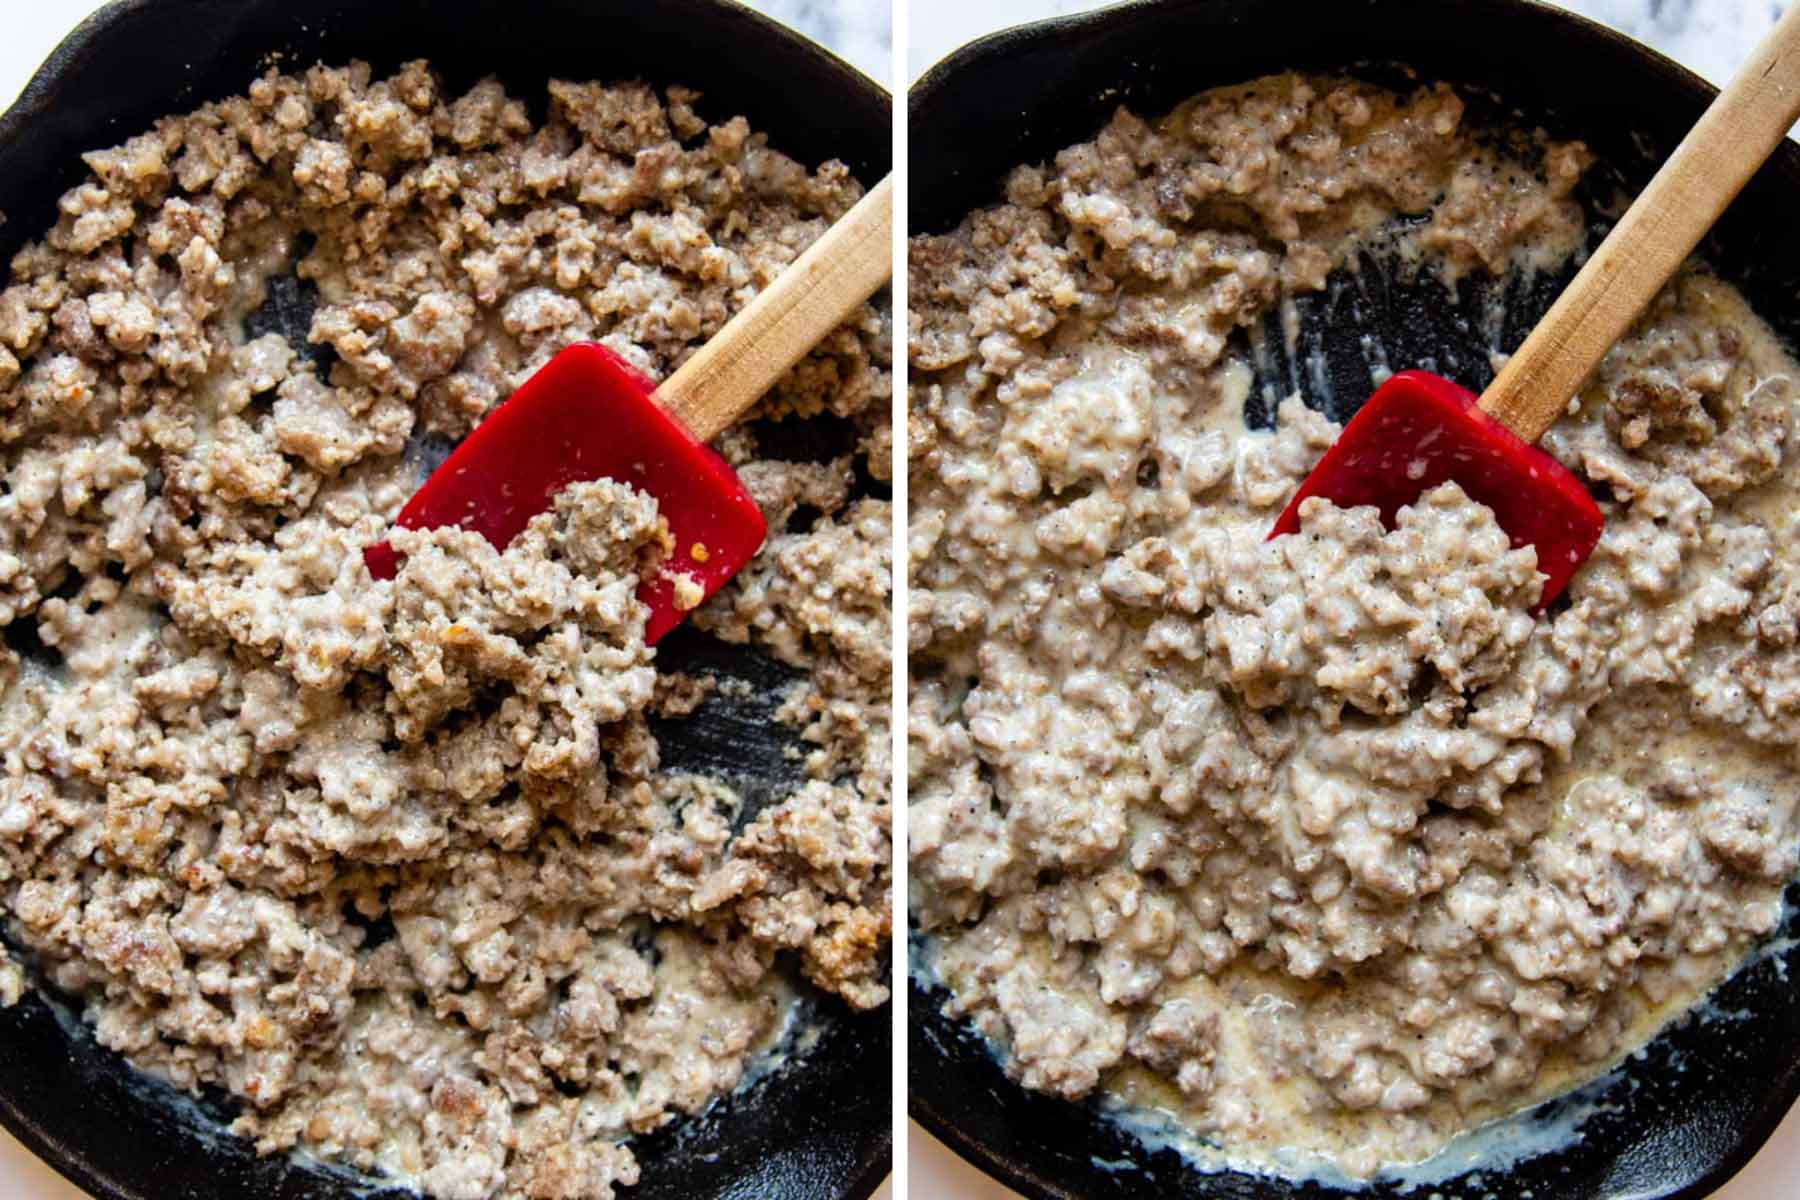 images showing how to make gluten free sausage gravy.